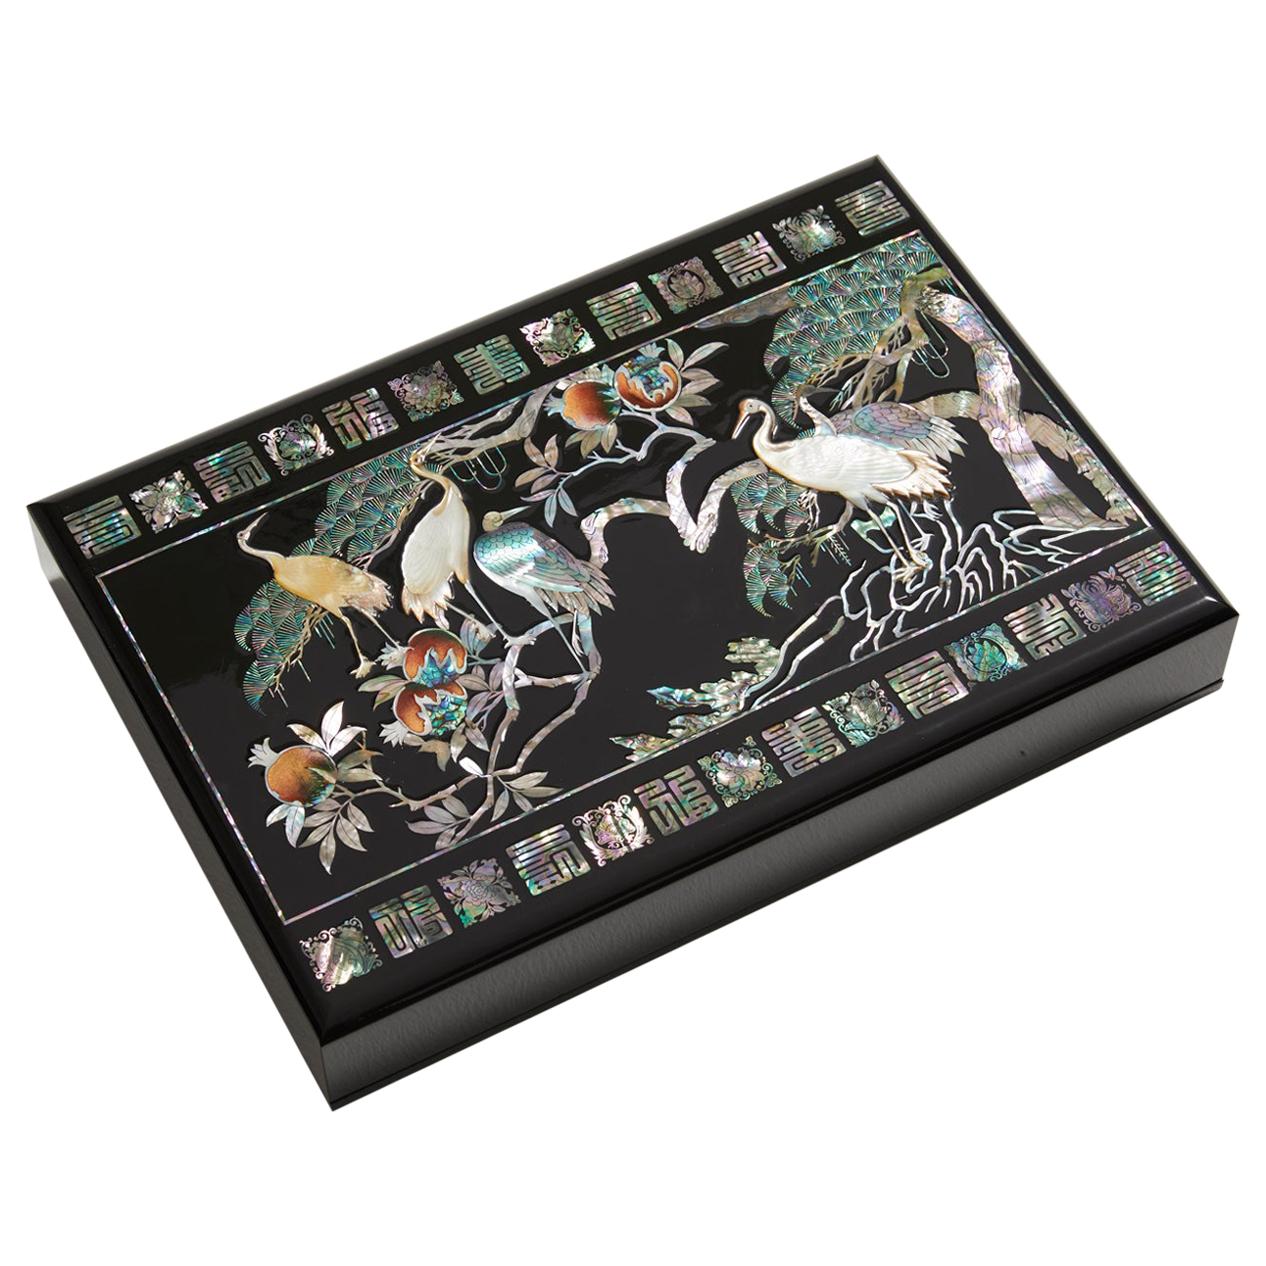 Mother of Pearl Lacquer Box with Ten Longevity Symbols by Arijian